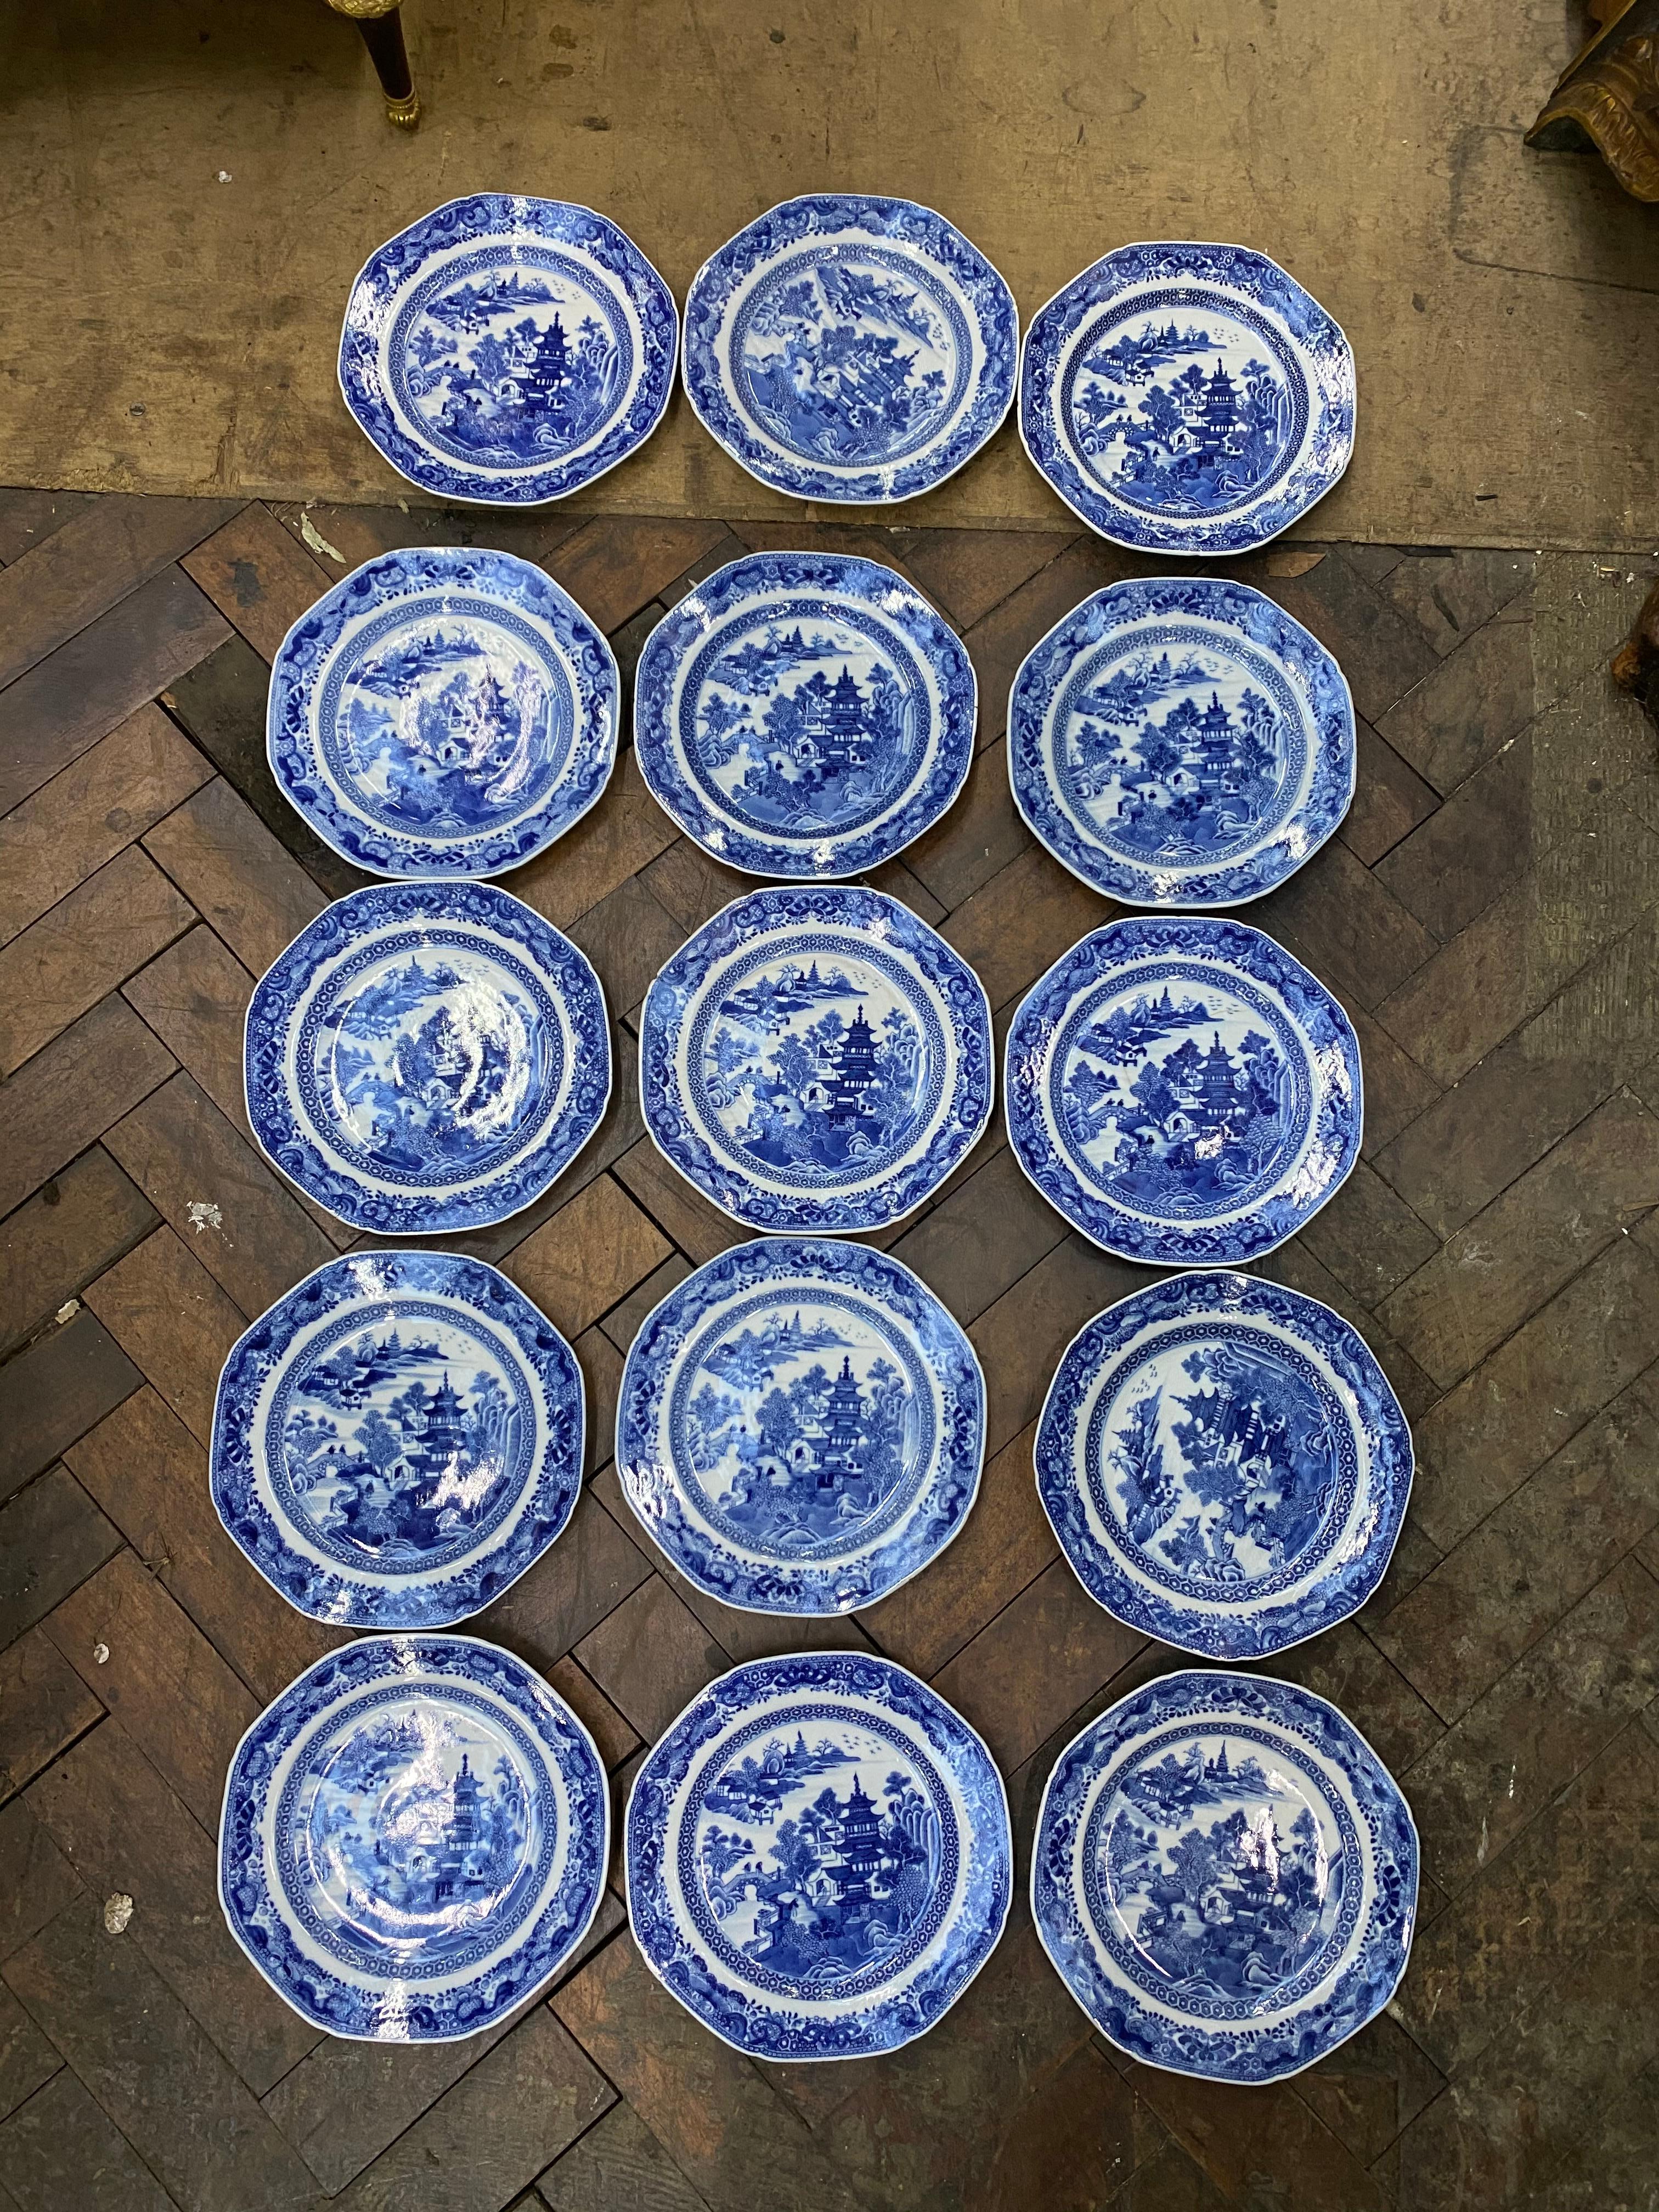 Chinese Export large collection of an 18th Century Chinese Nanking dinner service